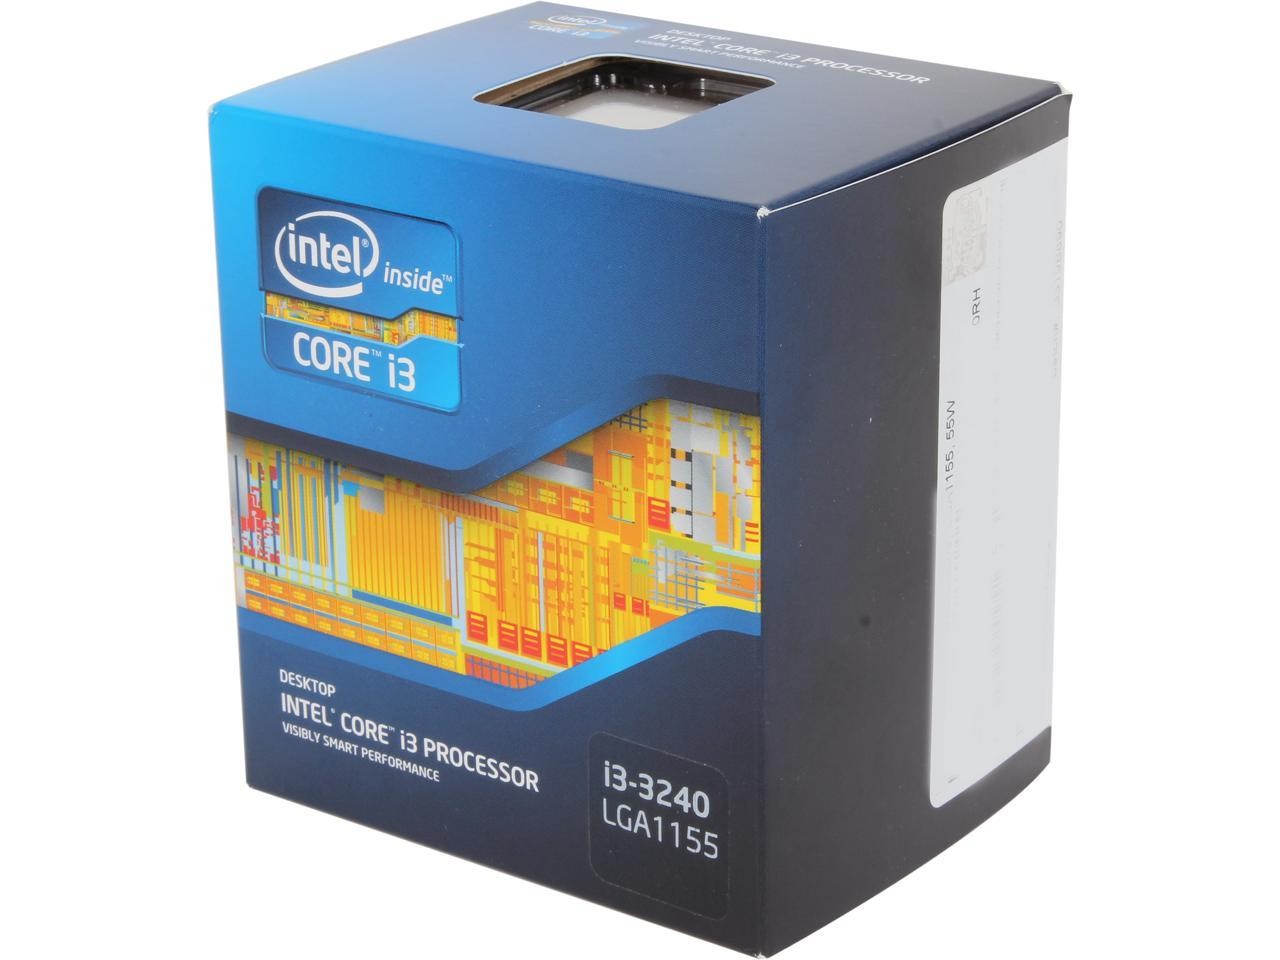 Intel Core i3-3240 @ 3.40GHz 3rd Gen Processor For H61 Mainboard(Box And Fan Not included)